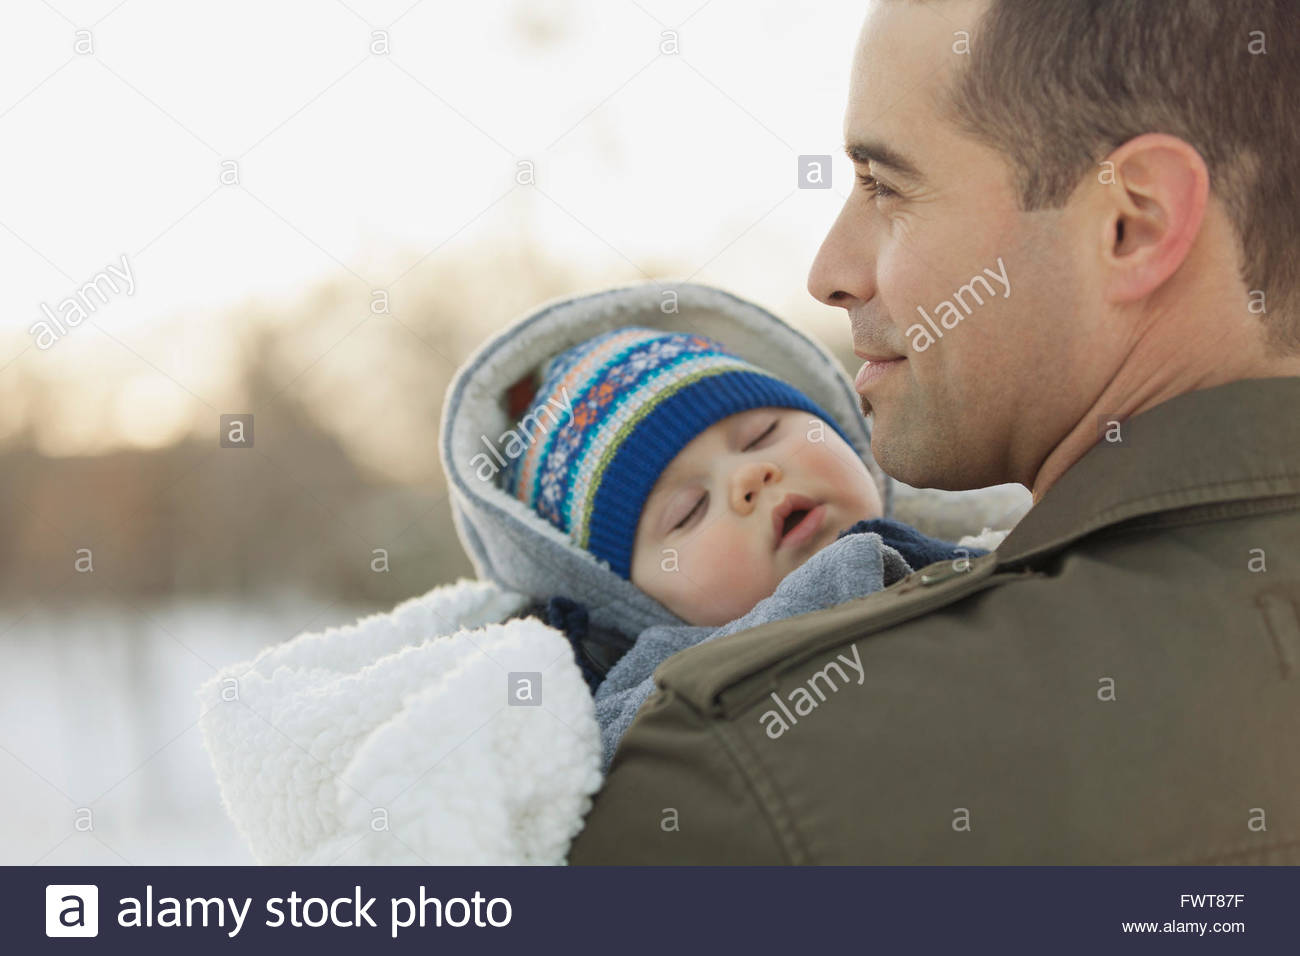 Man carrying baby boy outdoors in winter Banque D'Images